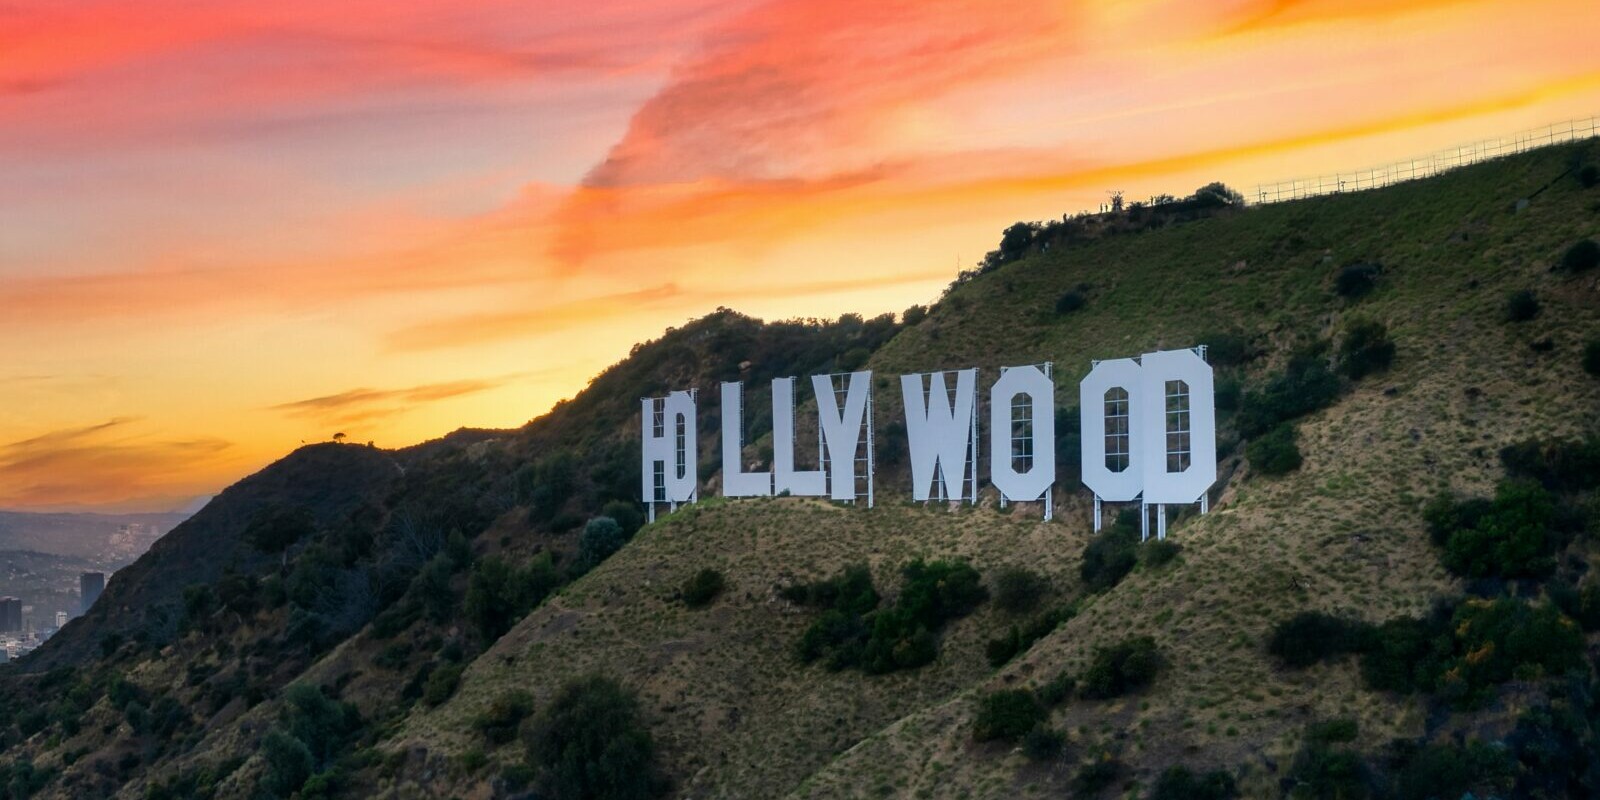 Hollywood and the American Dream